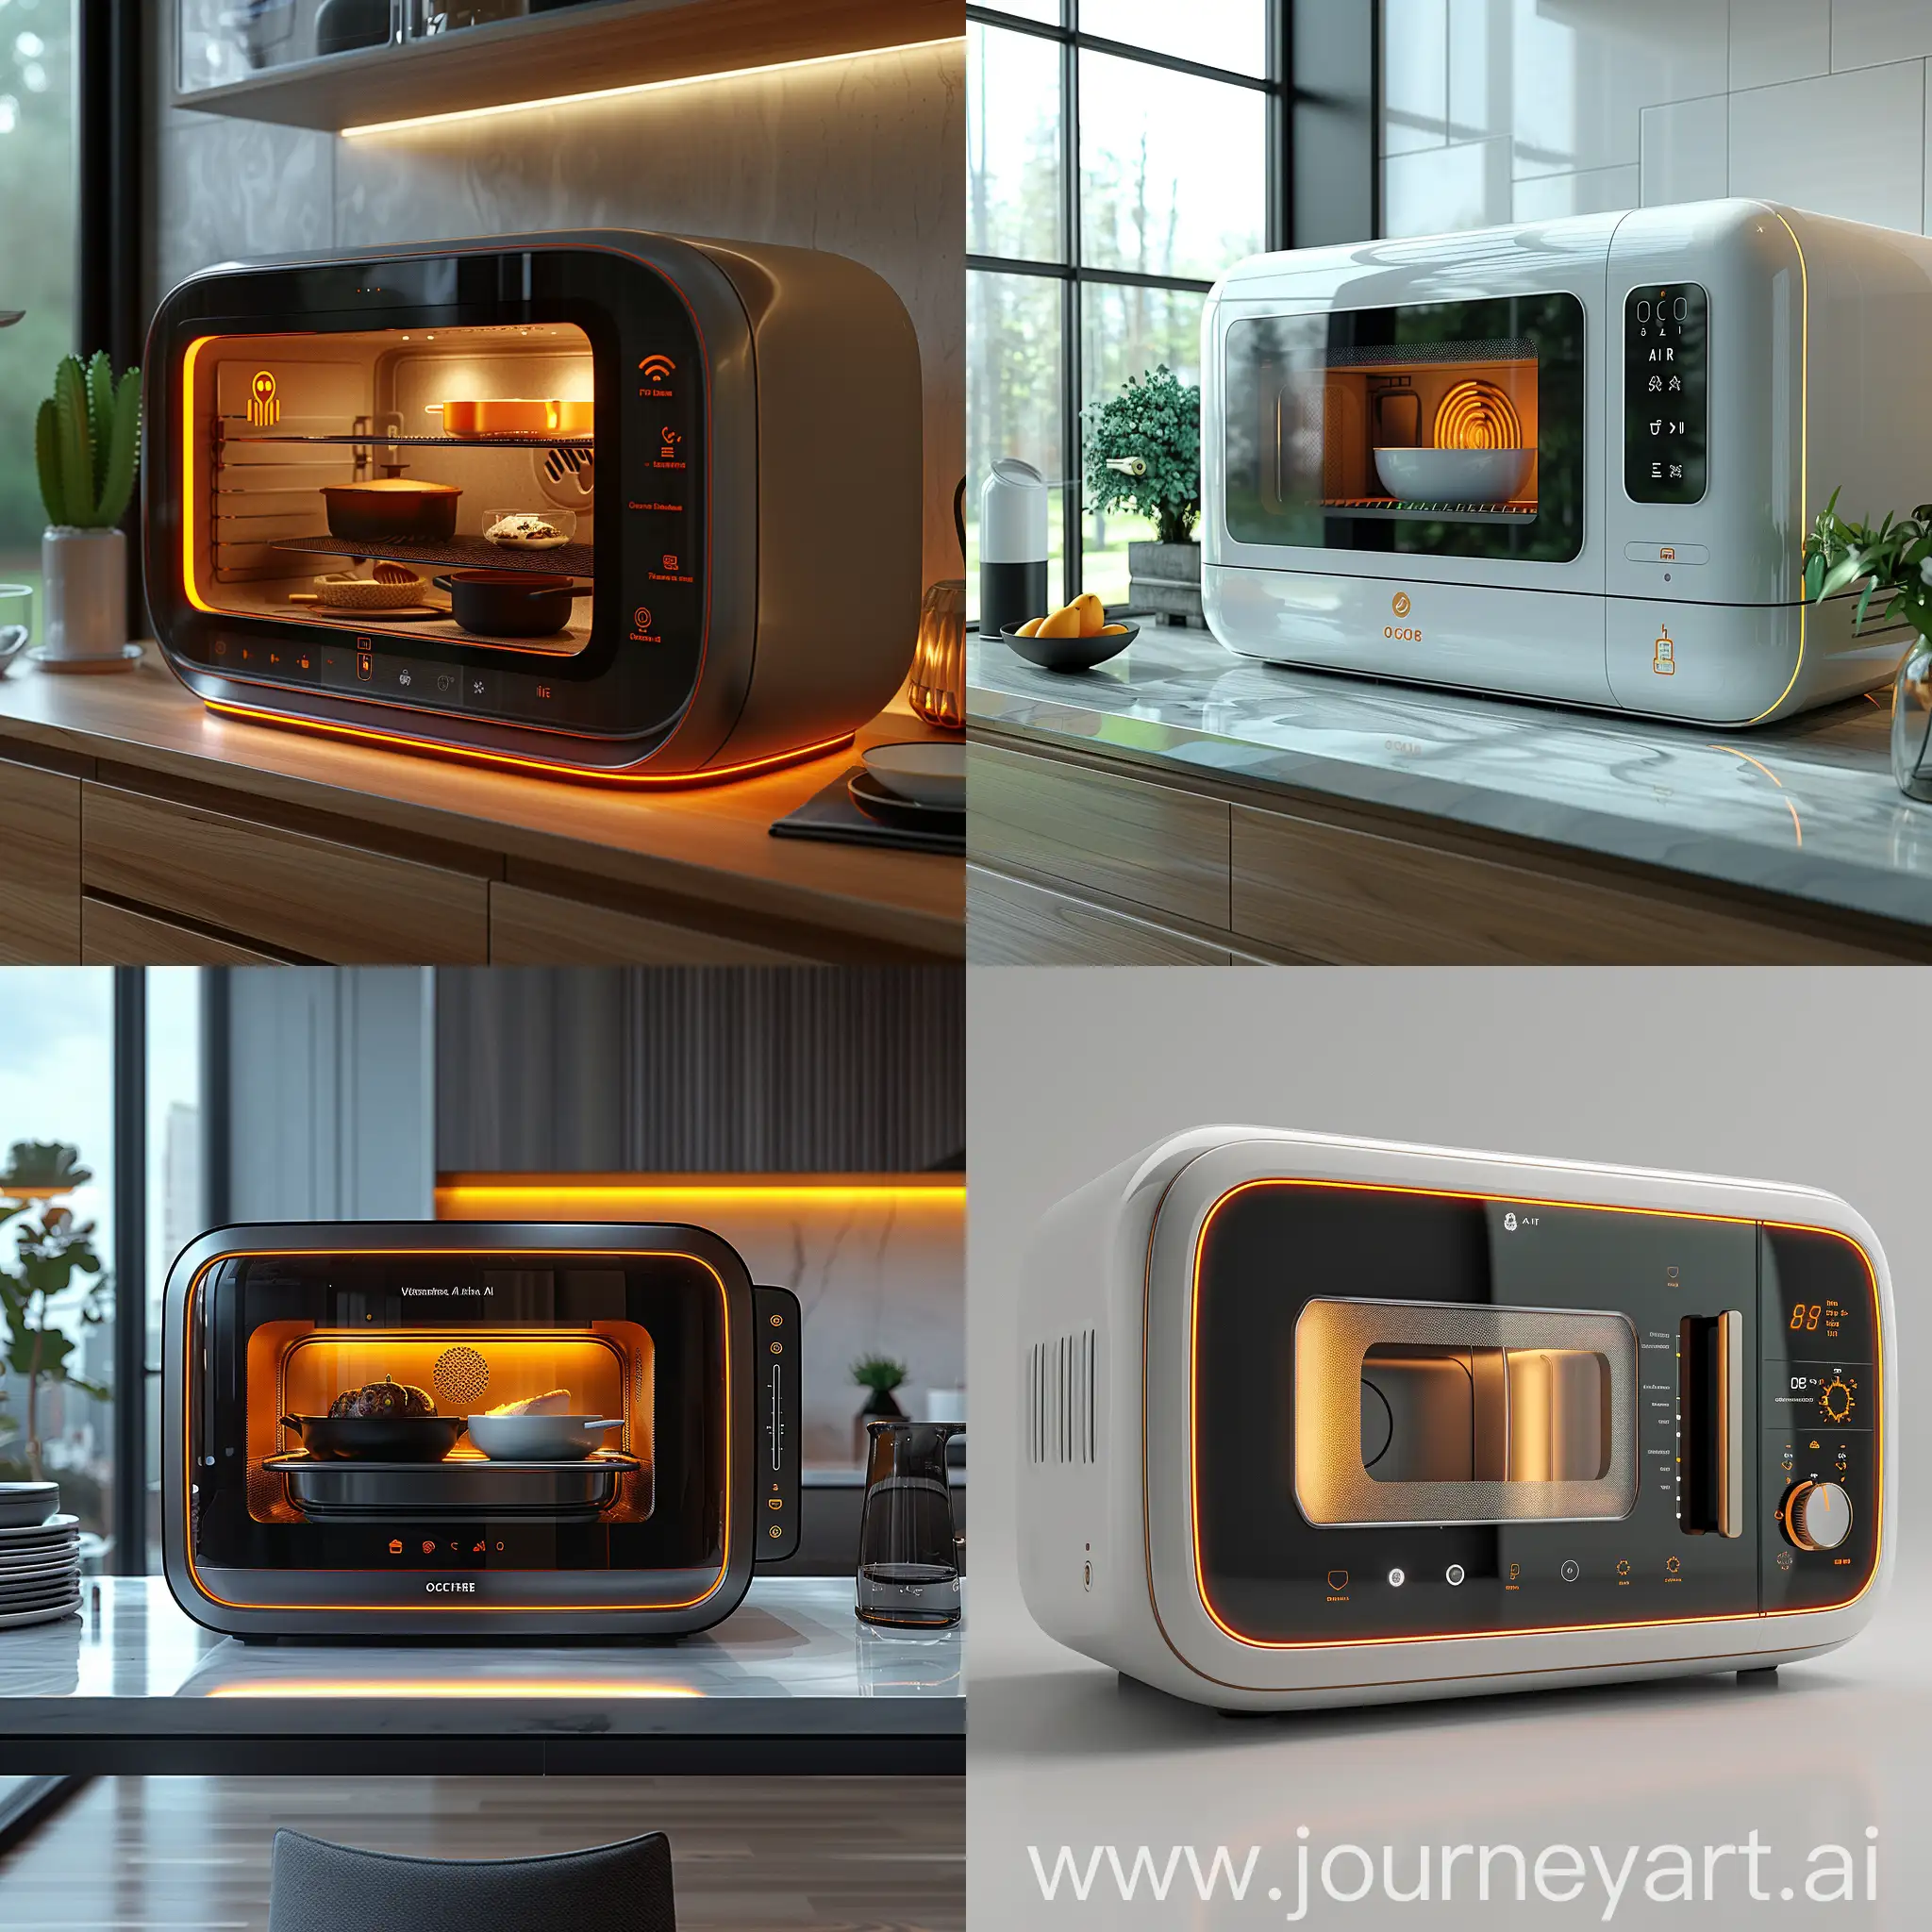 Futuristic-Microwave-with-AI-Cooking-Assistant-and-Virtual-Reality-Recipe-Library